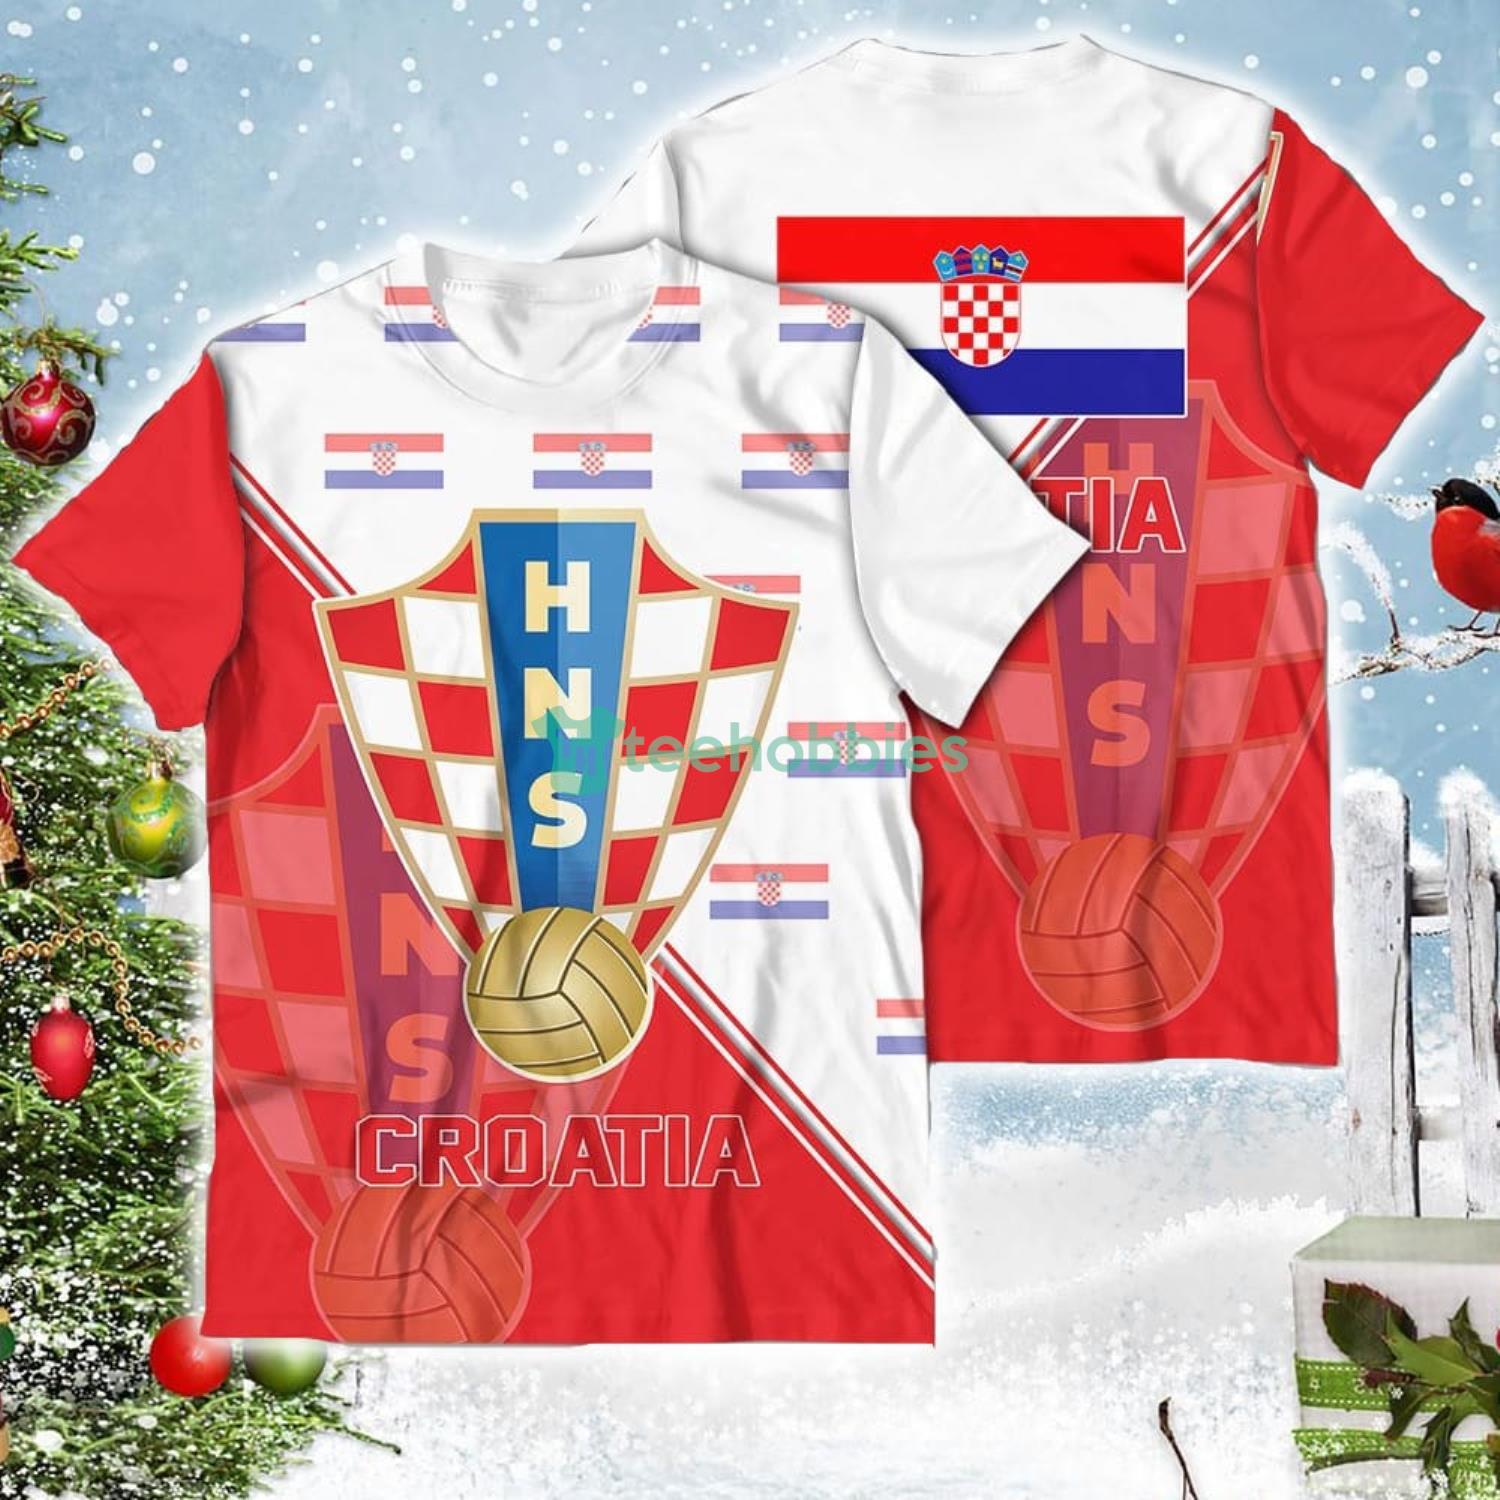 Croatia National Soccer Team Qatar World Cup 2022 Champions Soccer Team 3D All Over Printed Shirt Product Photo 2